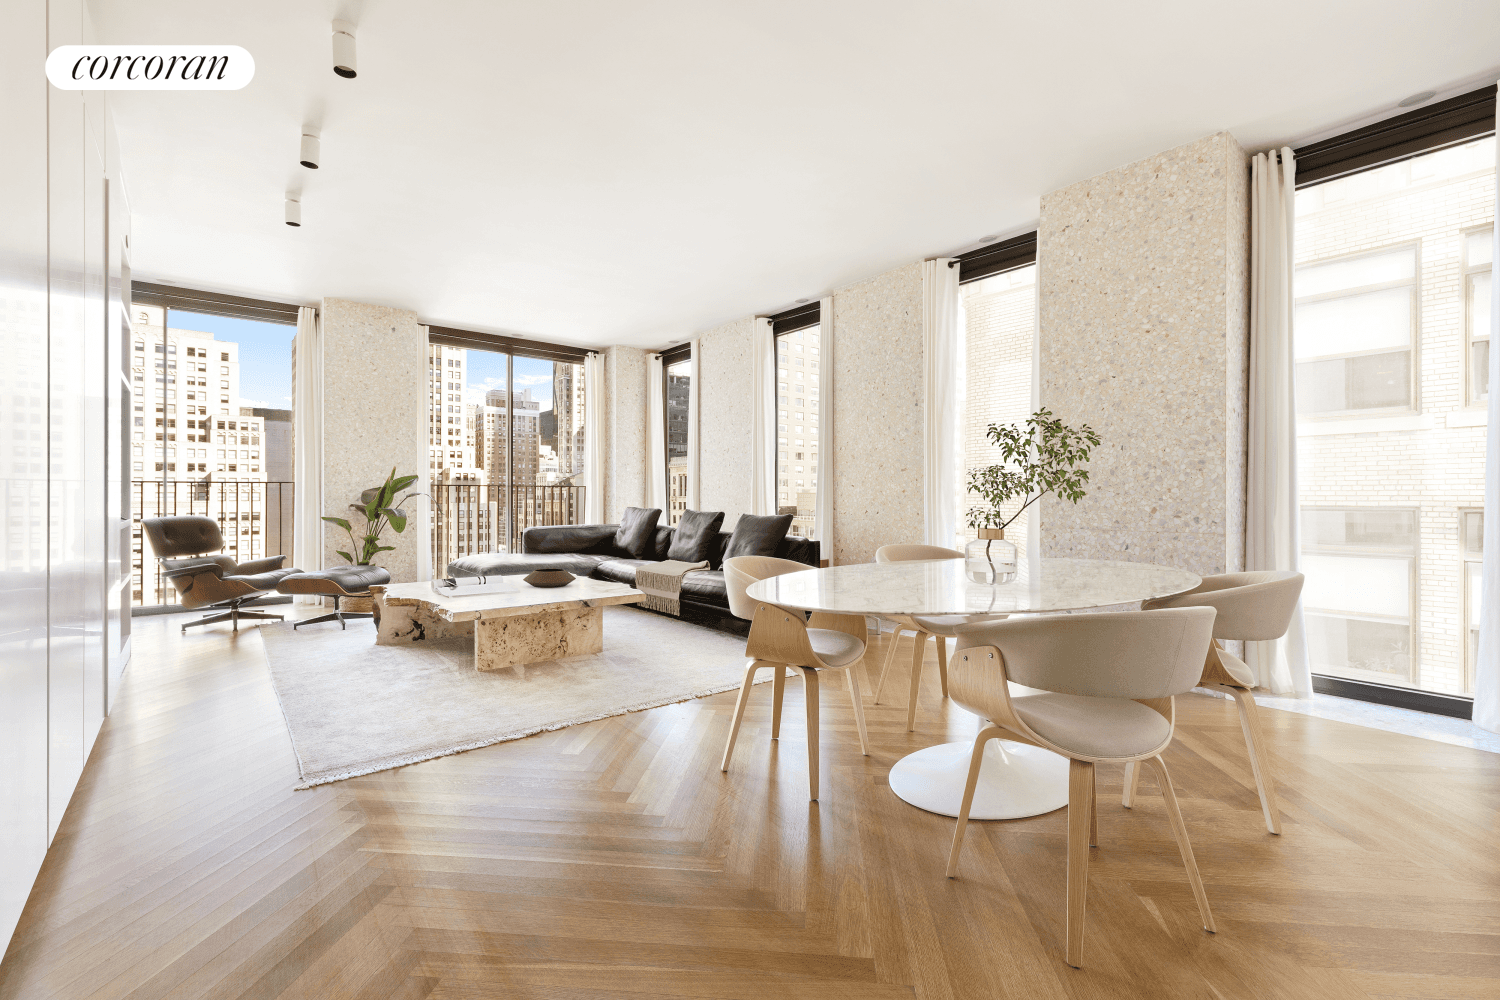 Enjoy breathtaking views of Bryant Park and Fifth Avenue from this stunning corner one bedroom residence, crafted by the Pritzker price wining David Chipperfield Architects.